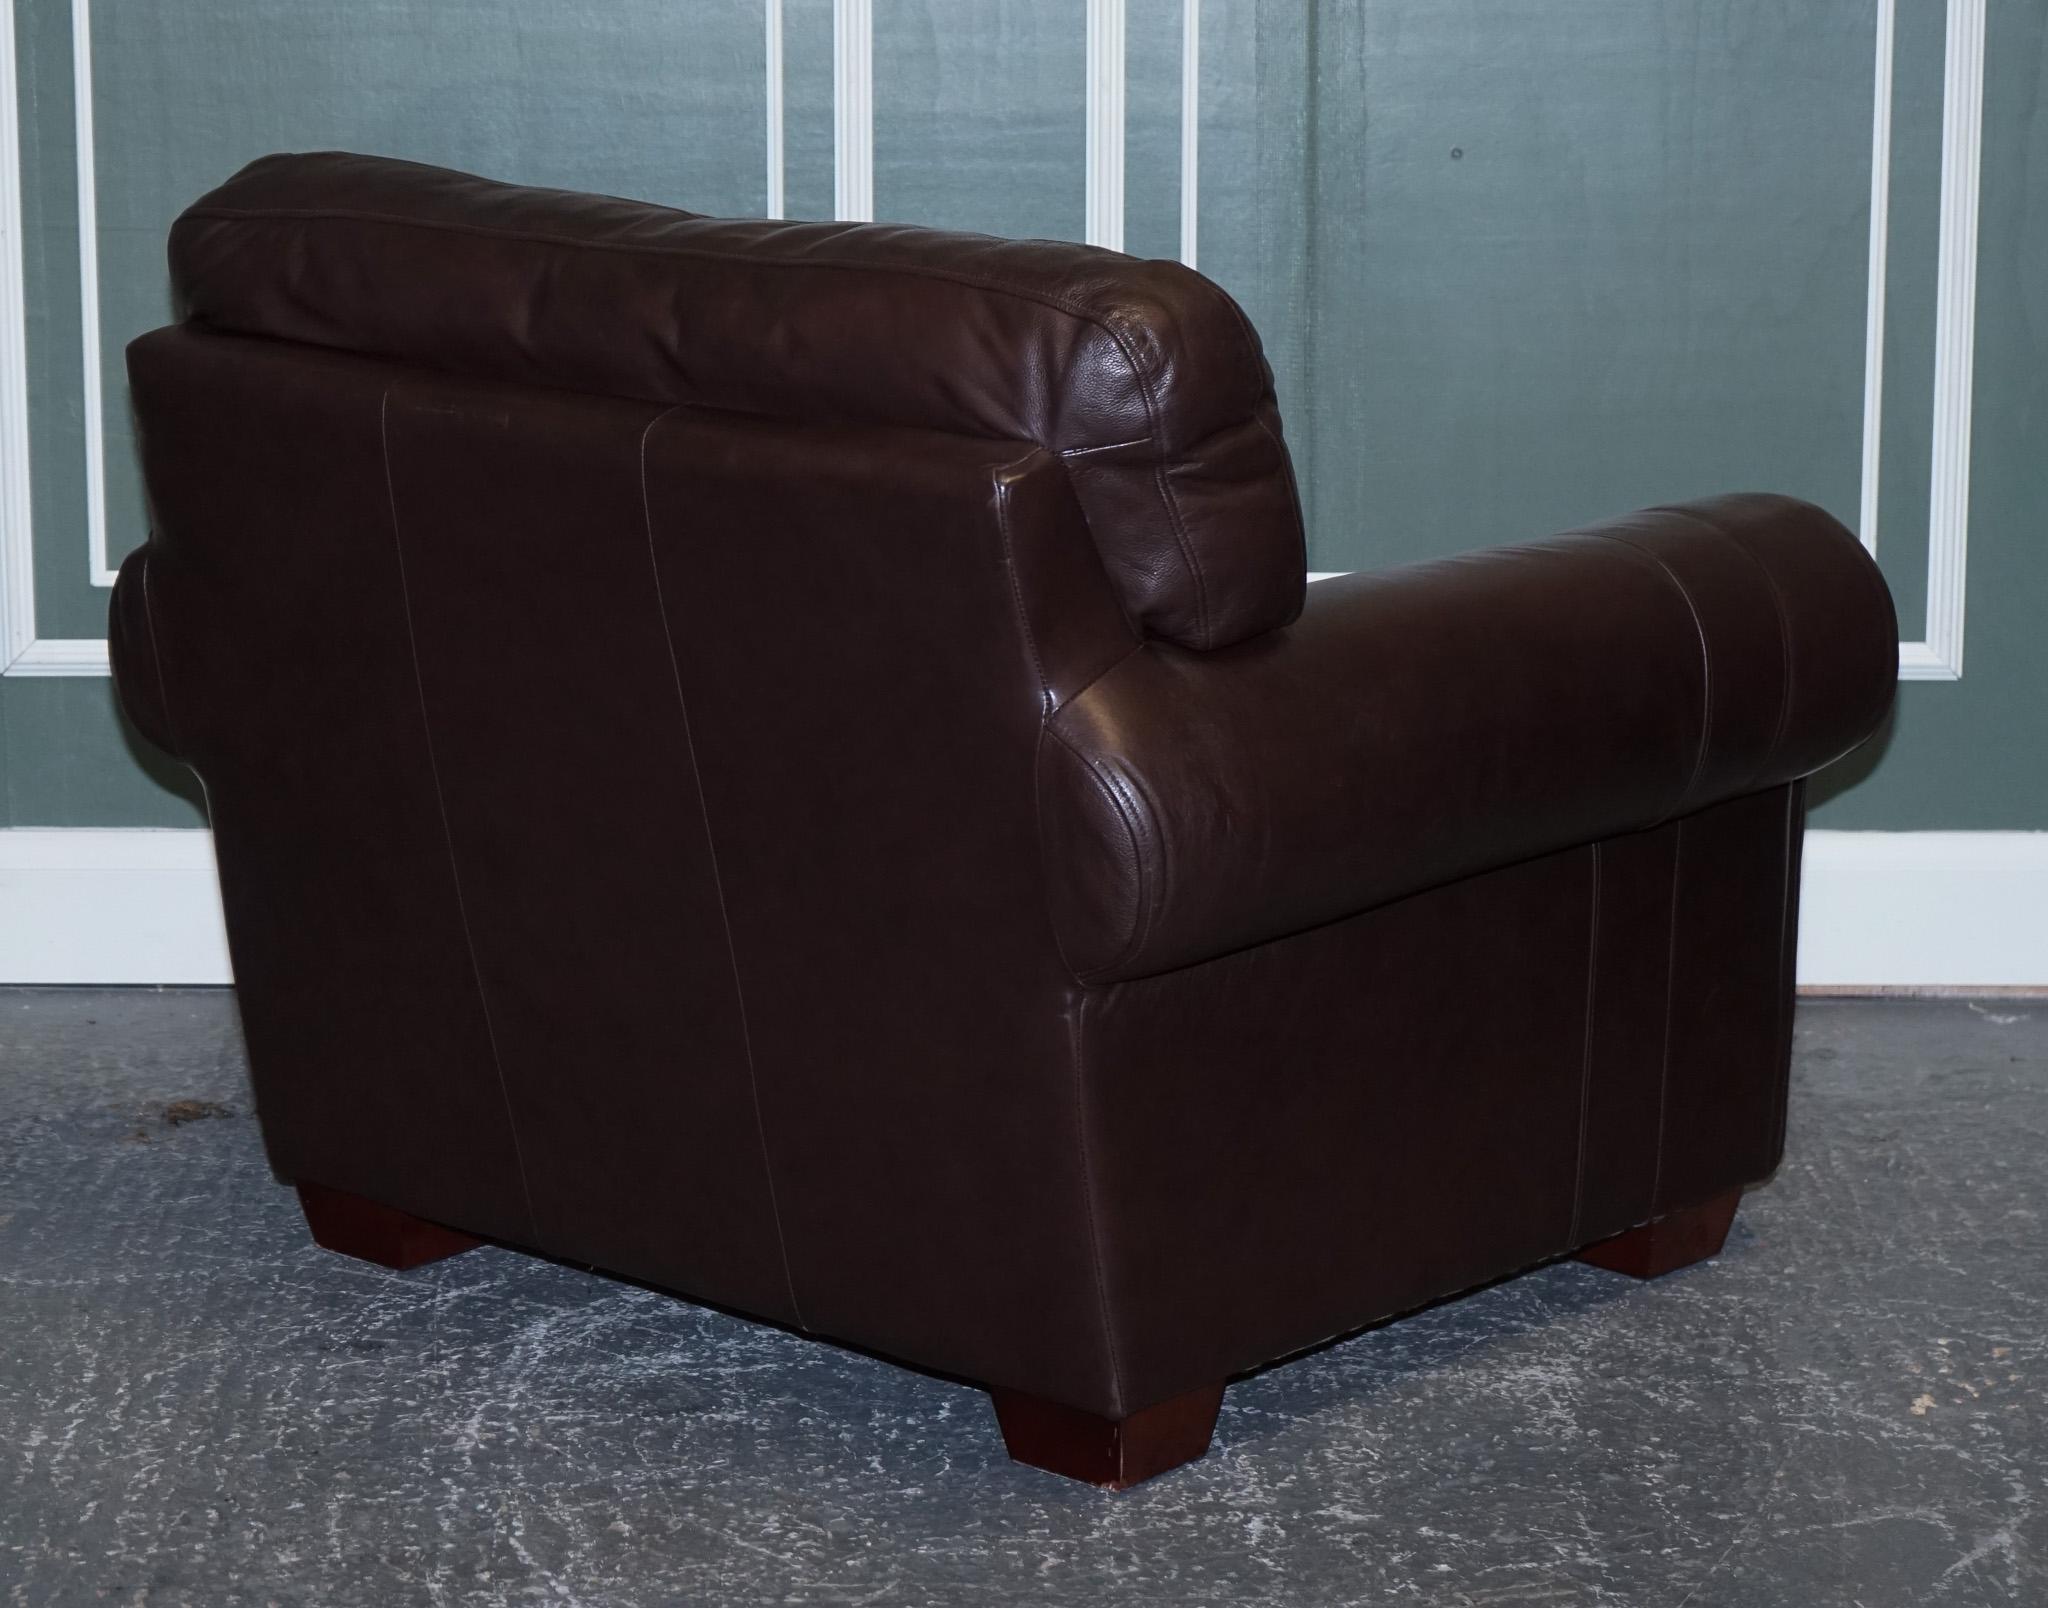 PAIR OF LARGE COMFORTABLE BROWN LEATHER ARMCHAIRS, MATCHiNG SOFA AVAILABLE For Sale 8